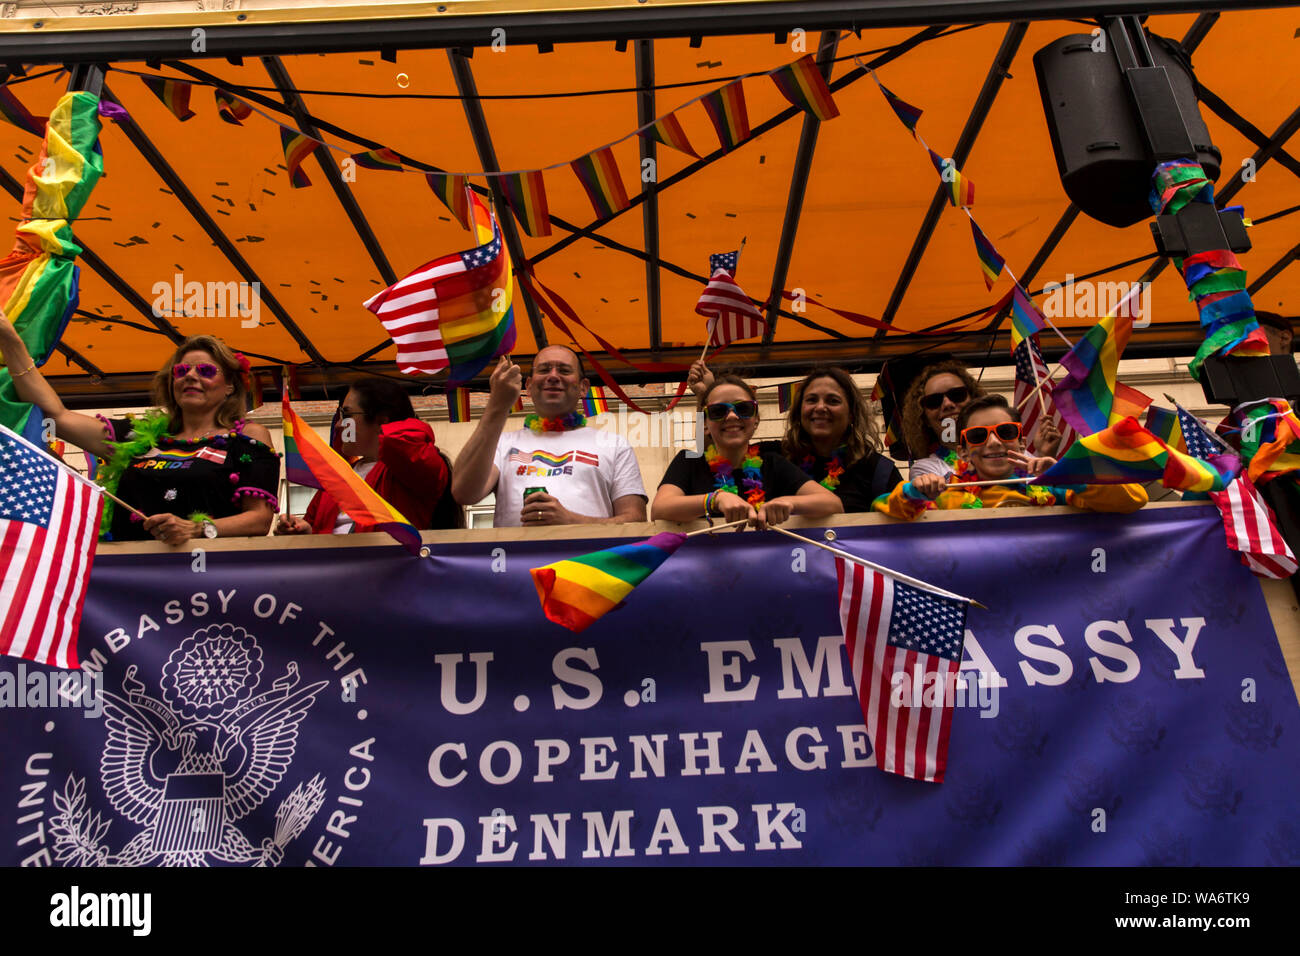 Employees at the US Embassy to Copenhagen participate at the Copenhagen Pride Parade 2019 on August 17, 2019 in Copenhagen, Denmark. The Danish Parade keep on growing: This year the Parade consisted of some 160 groups, counting 35 - 40.000 participants and along the 3.3 Km long route from the Frederiksberg City Hall to Copenhagen City Hall  some 250.000 – 300.000 spectators were lined up. The Parade together with the Pride Week has taken place since 1996. Coca Cola is the main Sponsor of this year Pride Week, which the organizer name “A Festival for Diversity”. (Byline: Photo by OJPHOTOS/Alamy Stock Photo